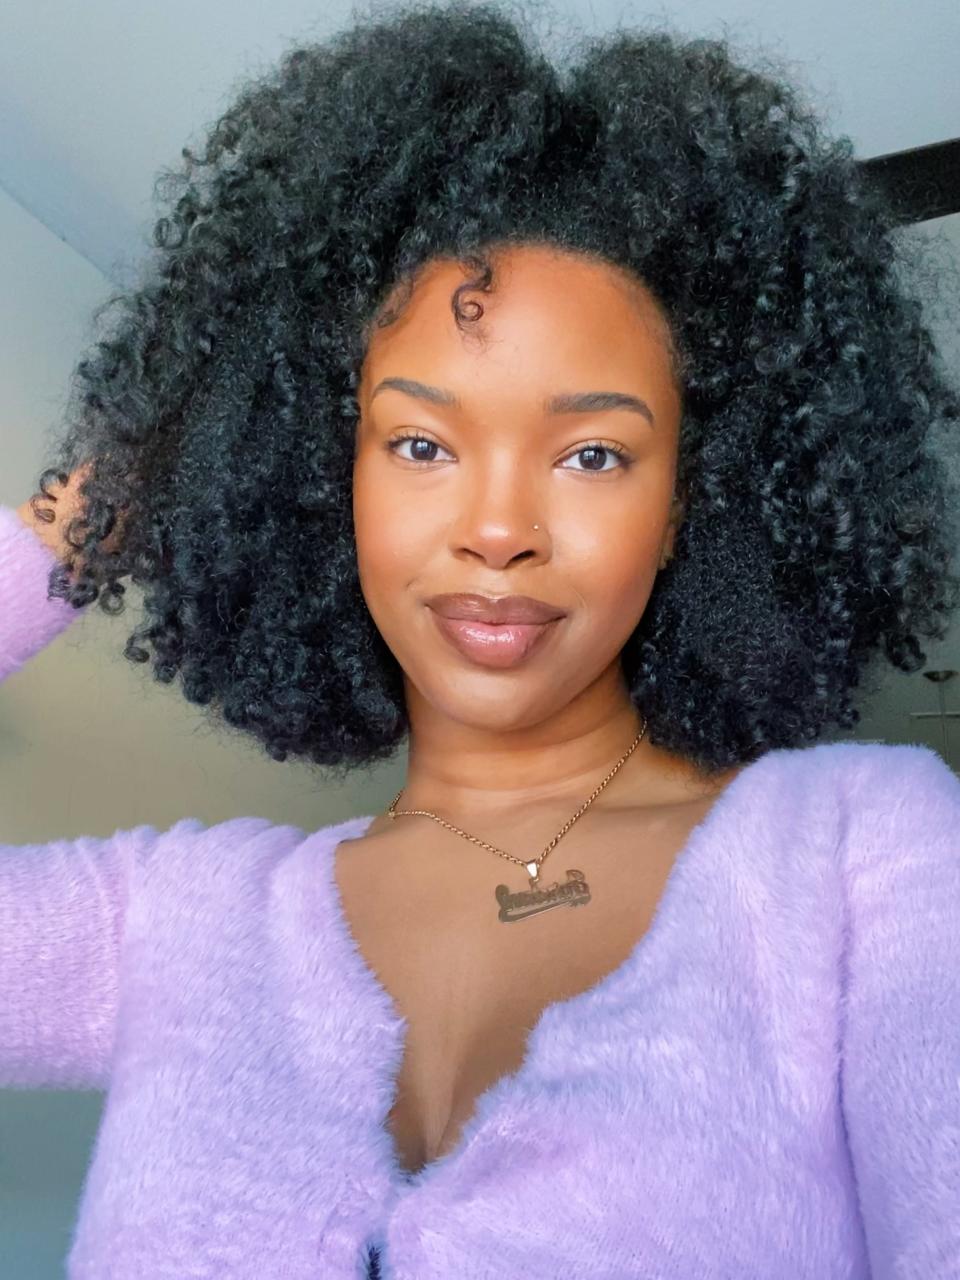 Jordan Kelley is a registered nurse who also runs a page dedicated to her natural hair journey.